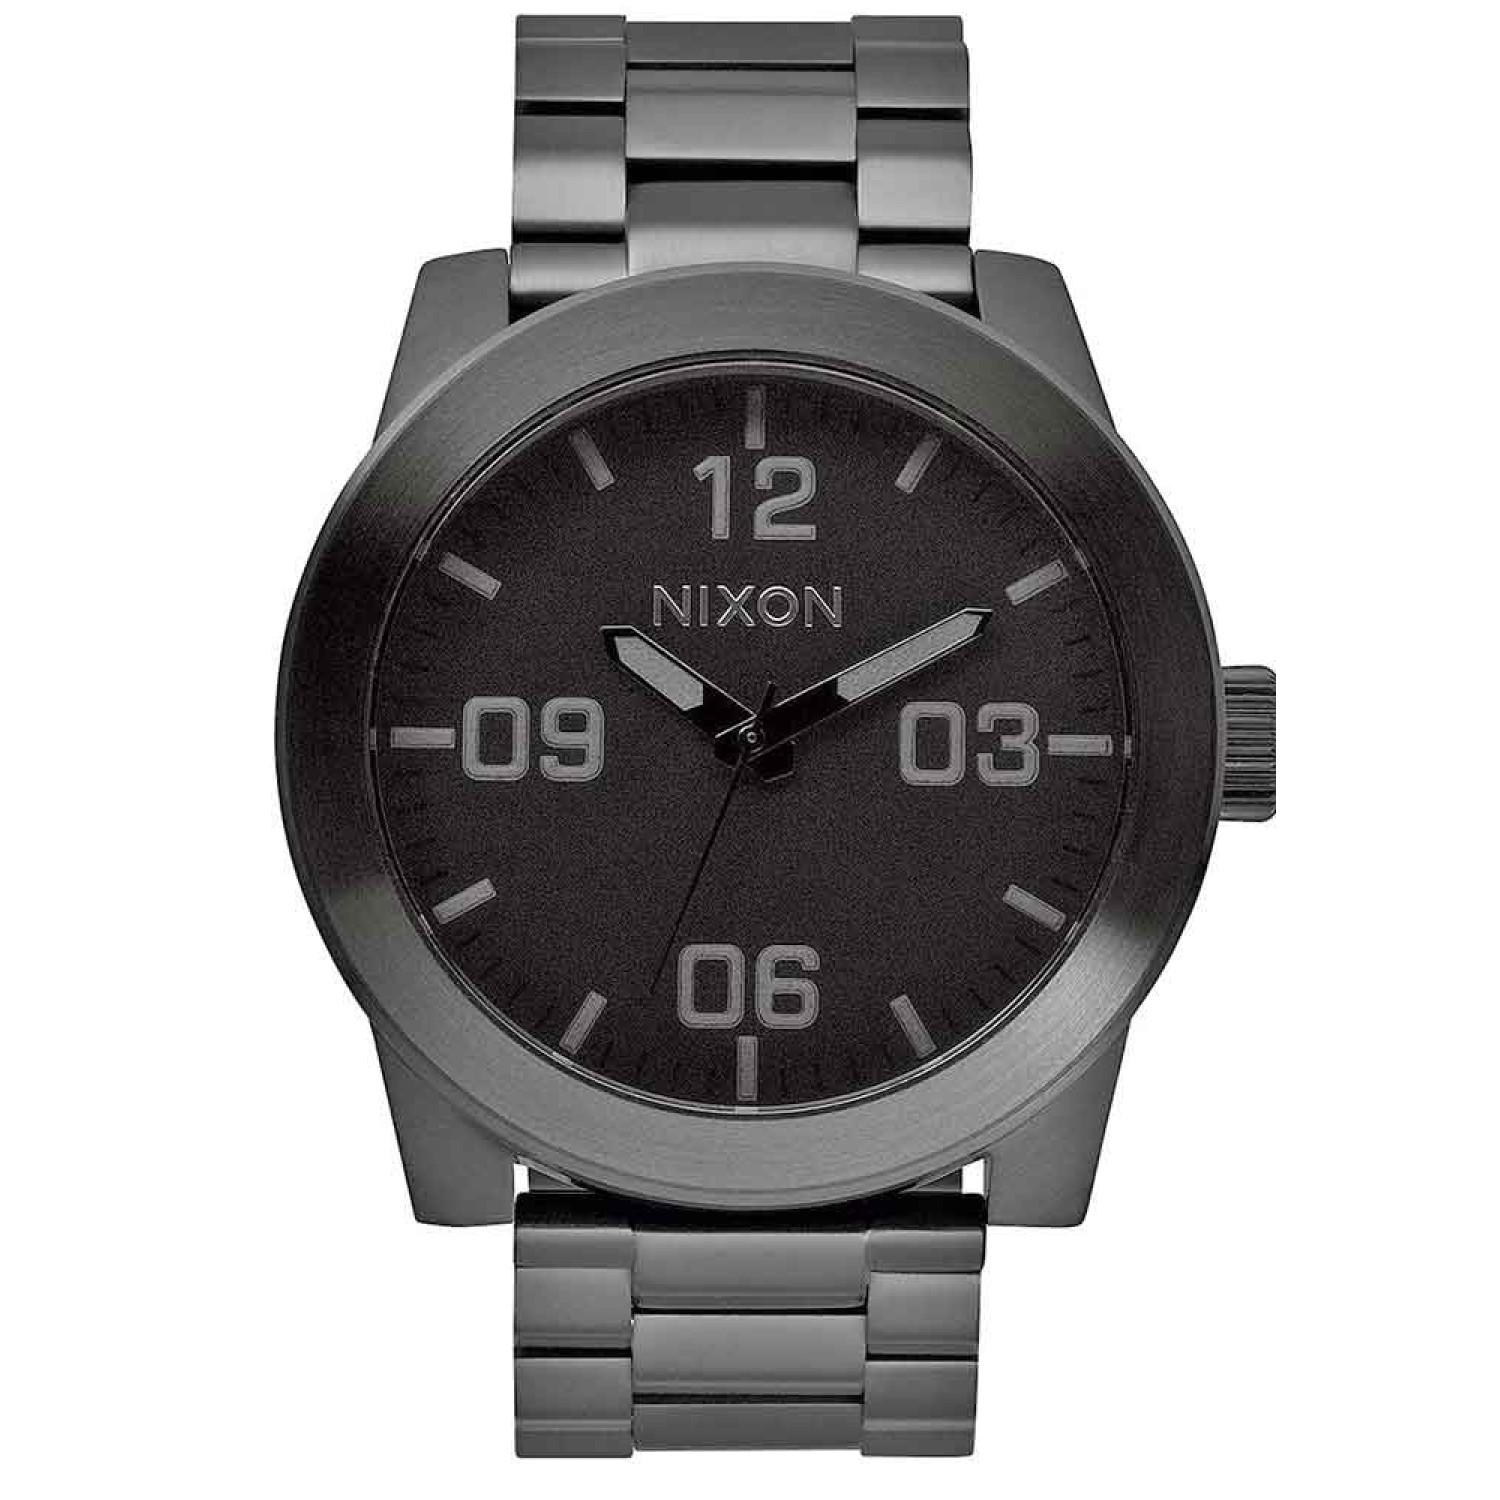 A346001 NIXON Corporal SS  Watch. Nixon A346001  Corporal SS model in a sleek design in black Ion-plated steel, set around an understated dial. 2 Year  Guarantee 3 Months No Payments and Interest for Q Card holders This watch is pressure @christies.online